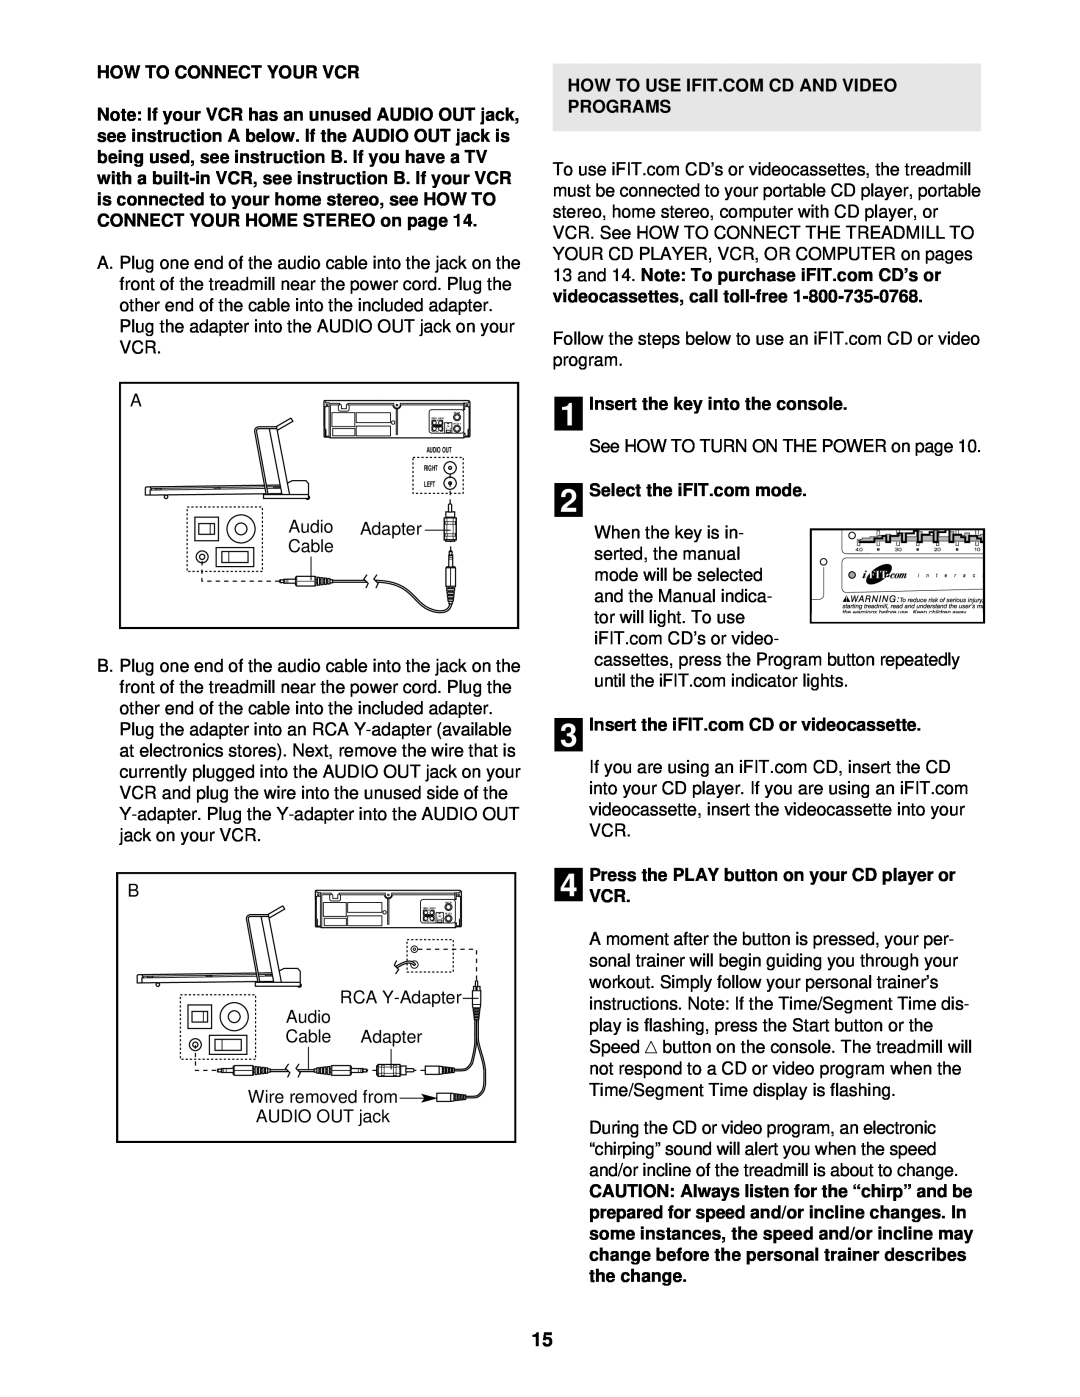 ProForm DRTL99720 user manual How To Connect Your Vcr, How To Use Ifit.Com Cd And Video Programs, Audio, Adapter, Cable 